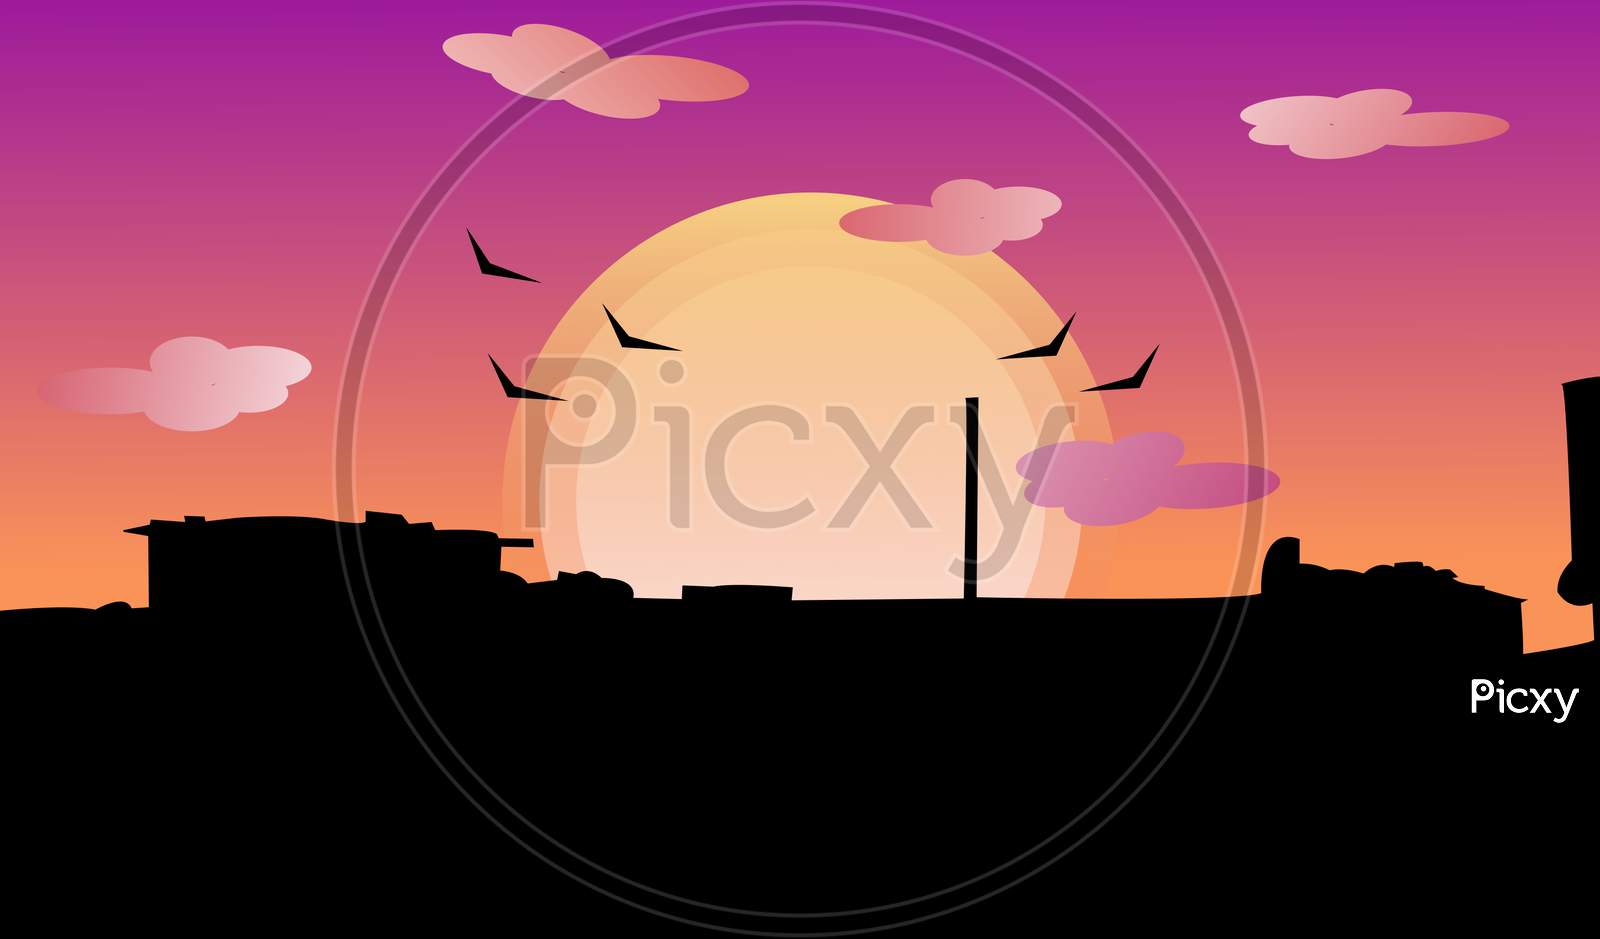 Illustration Graphic Of Morning View With The Sun Coming Behind The Building And Birds Flying In The Sky With The Cloudy Sky.